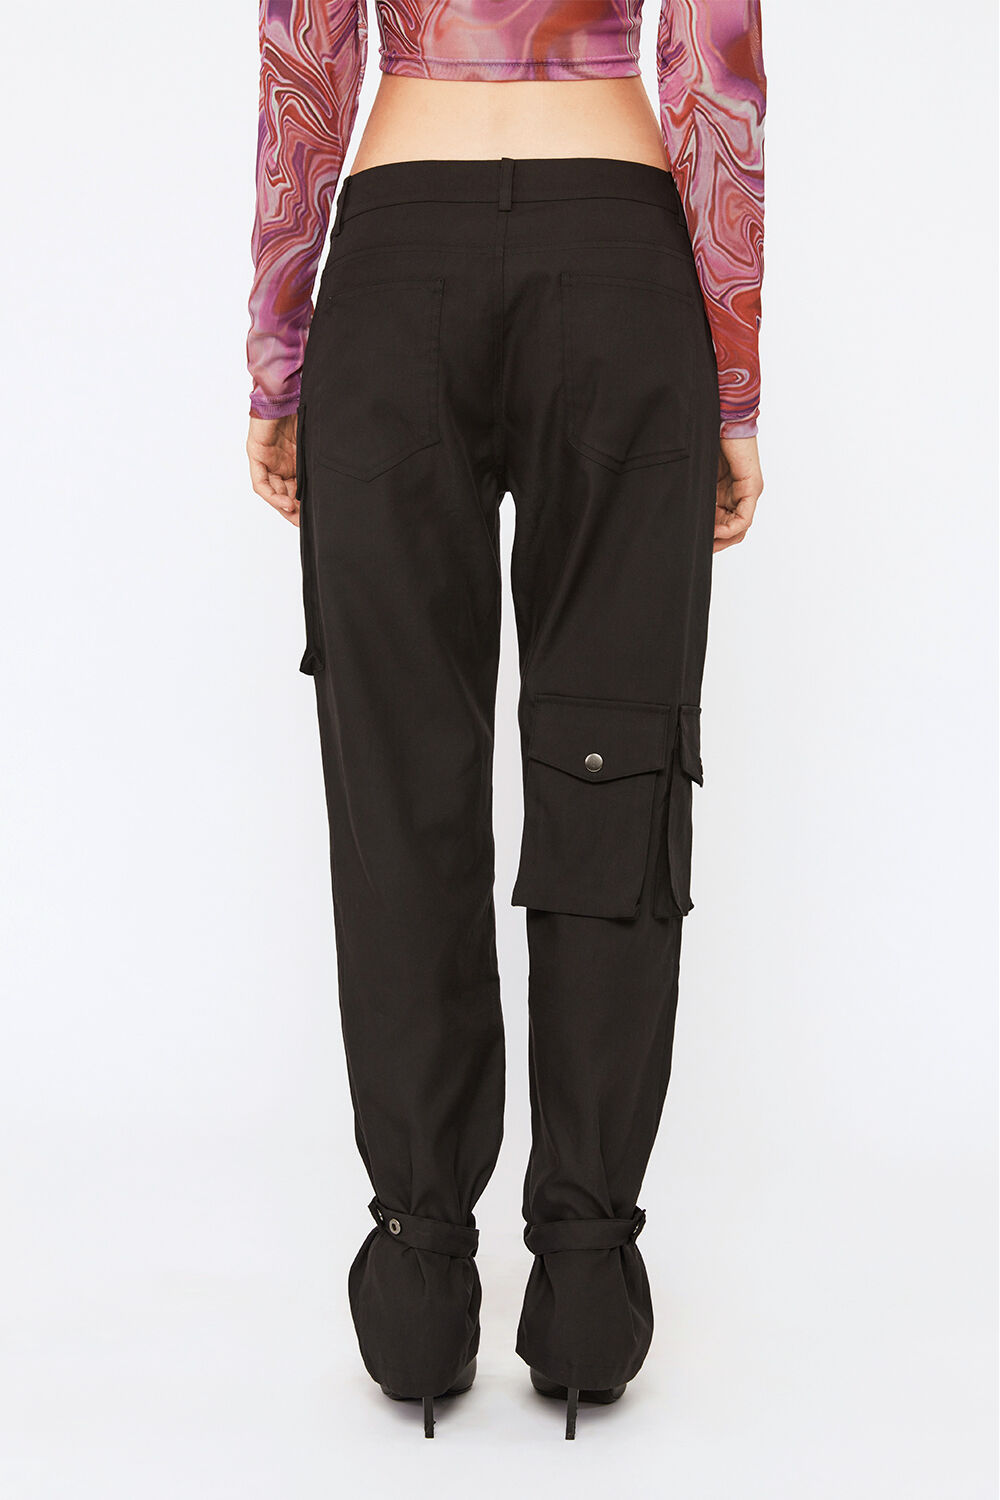 CHARLIE CARGO PANT in colour CAVIAR